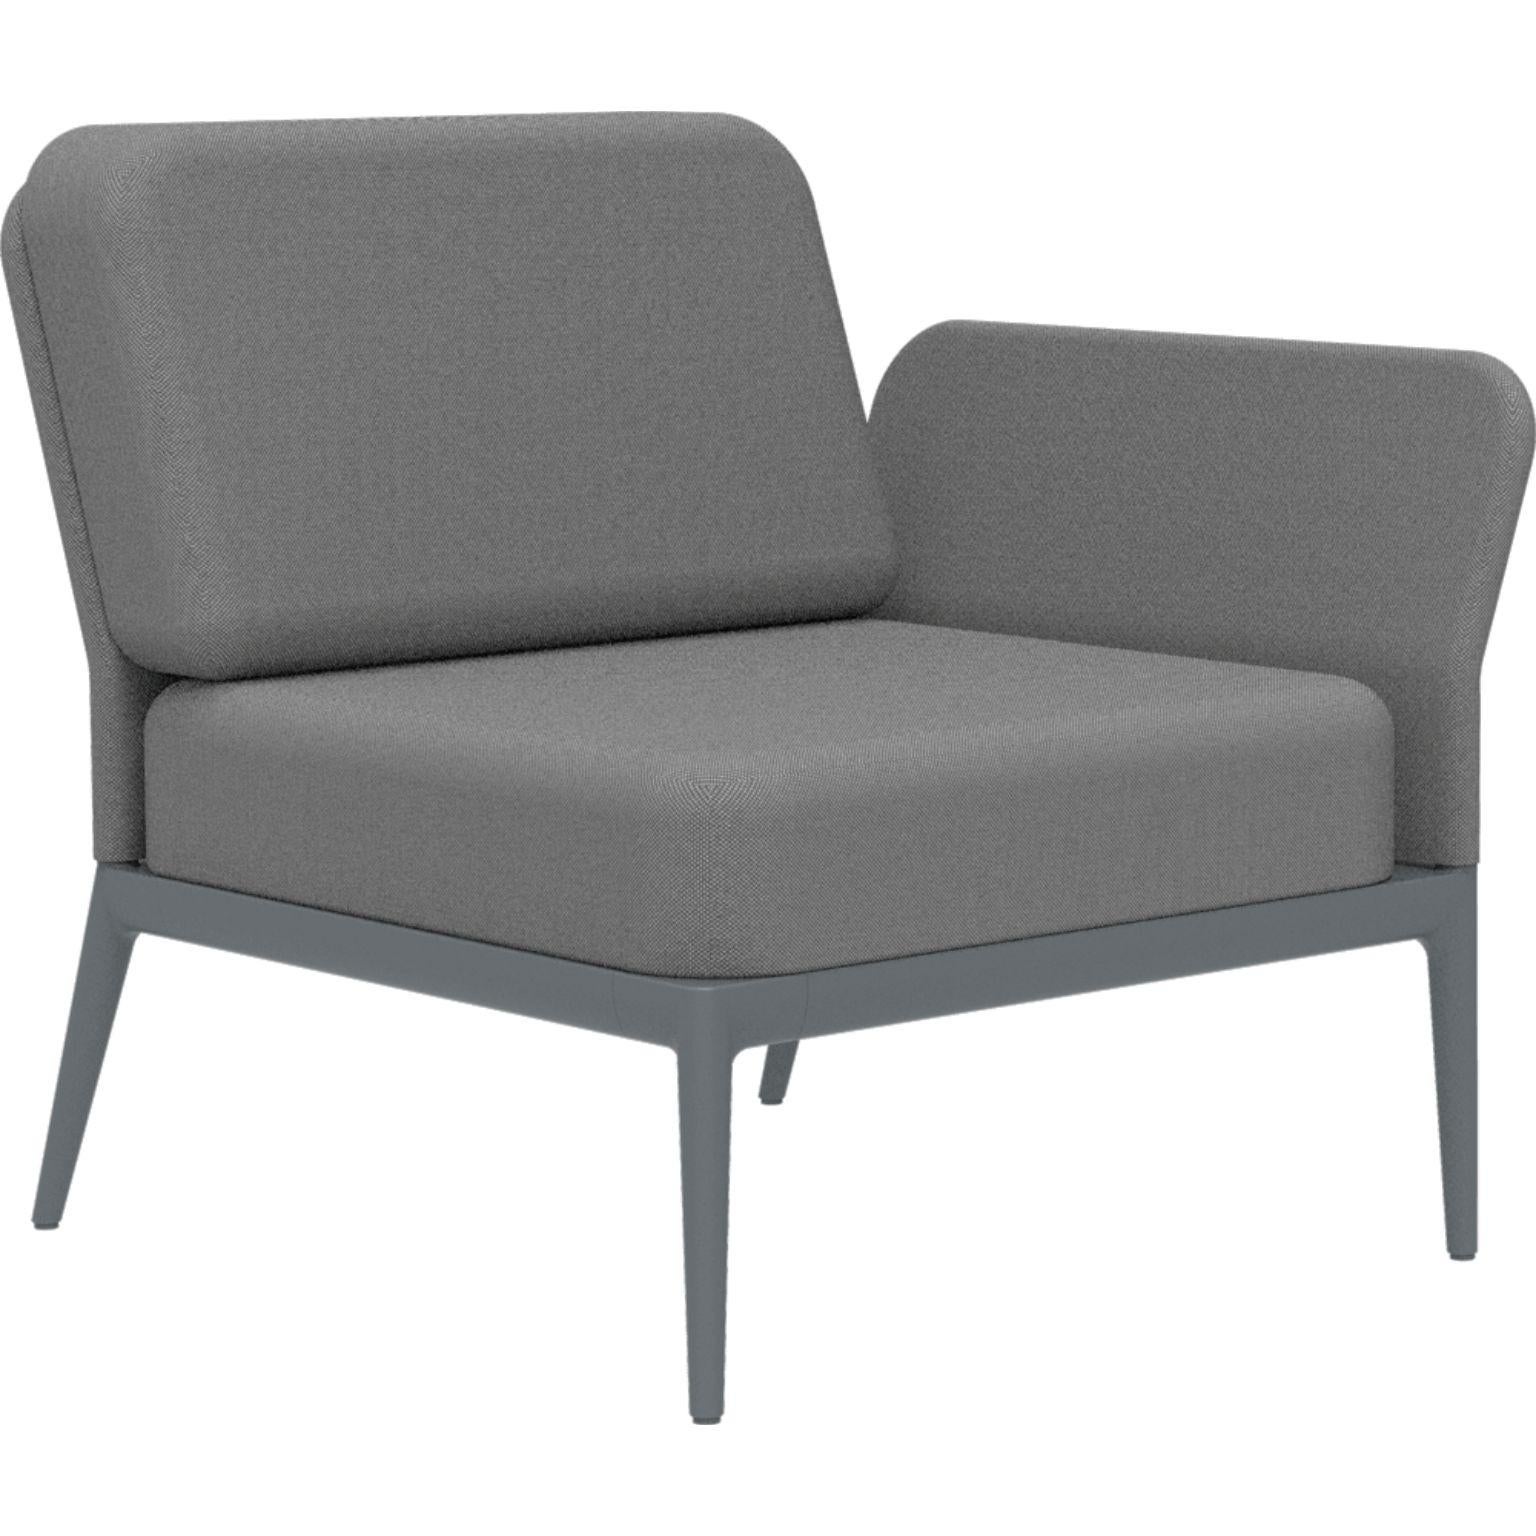 Cover Grey Left Modular Sofa by MOWEE
Dimensions: D83 x W80 x H81 cm (seat height 42 cm).
Material: Aluminium and upholstery.
Weight: 19 kg.
Also available in different colors and finishes. Please contact us.

An unmistakable collection for